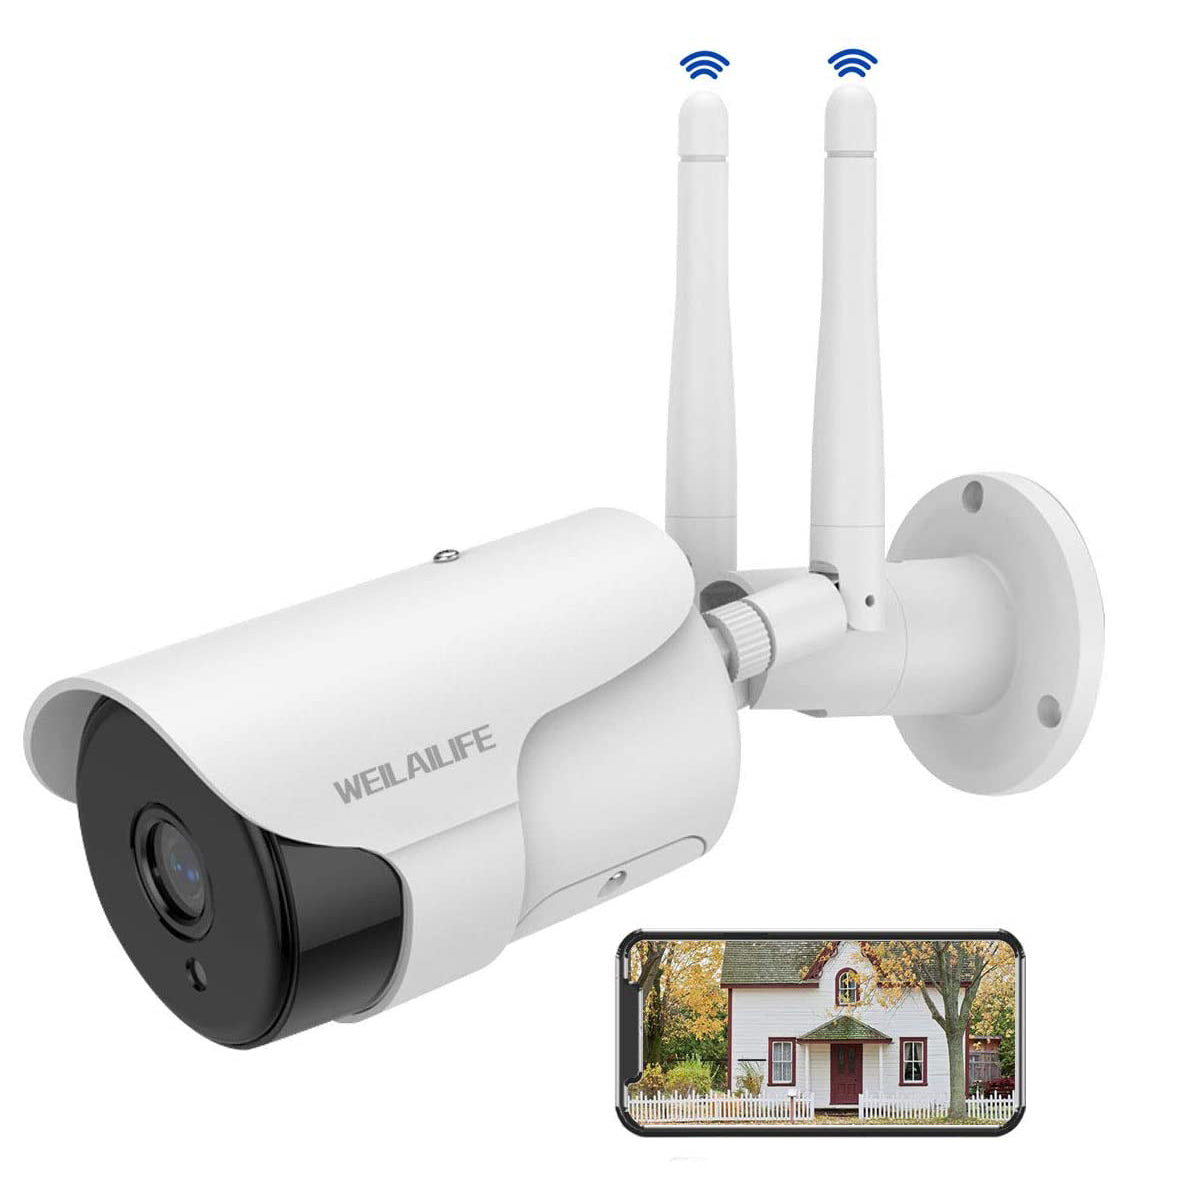 [Two Way Audio] Wireless Outdoor Security Camera – WEILAILIFE Security ...